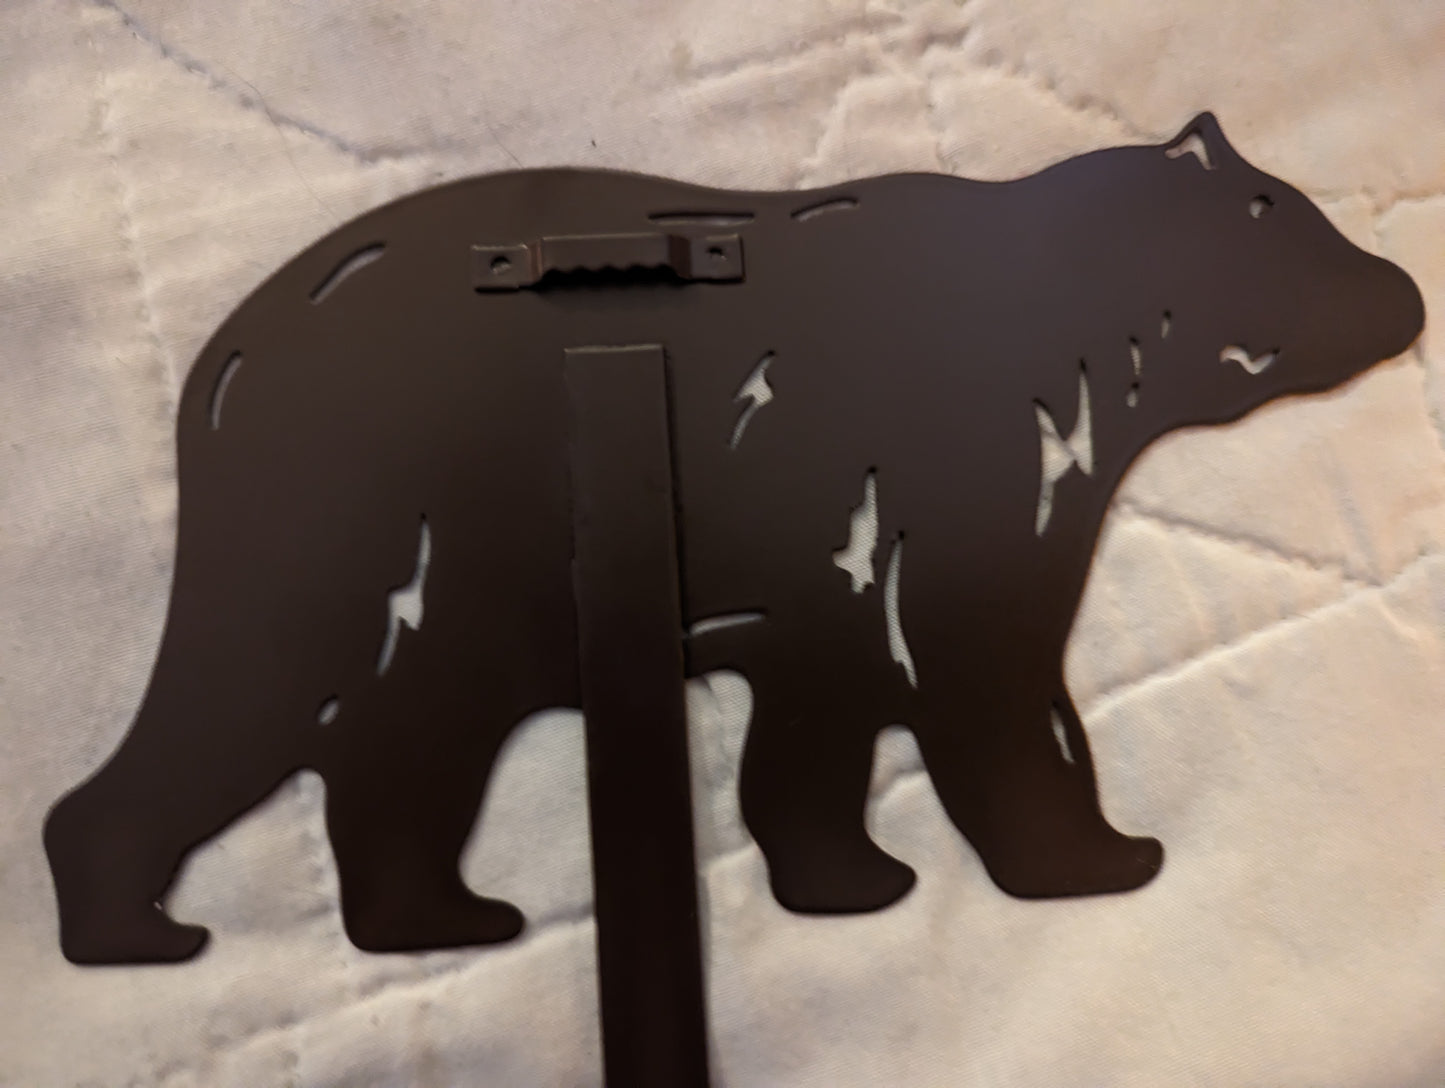 Hanging Metal Bear Candle holder with Battery operated candle